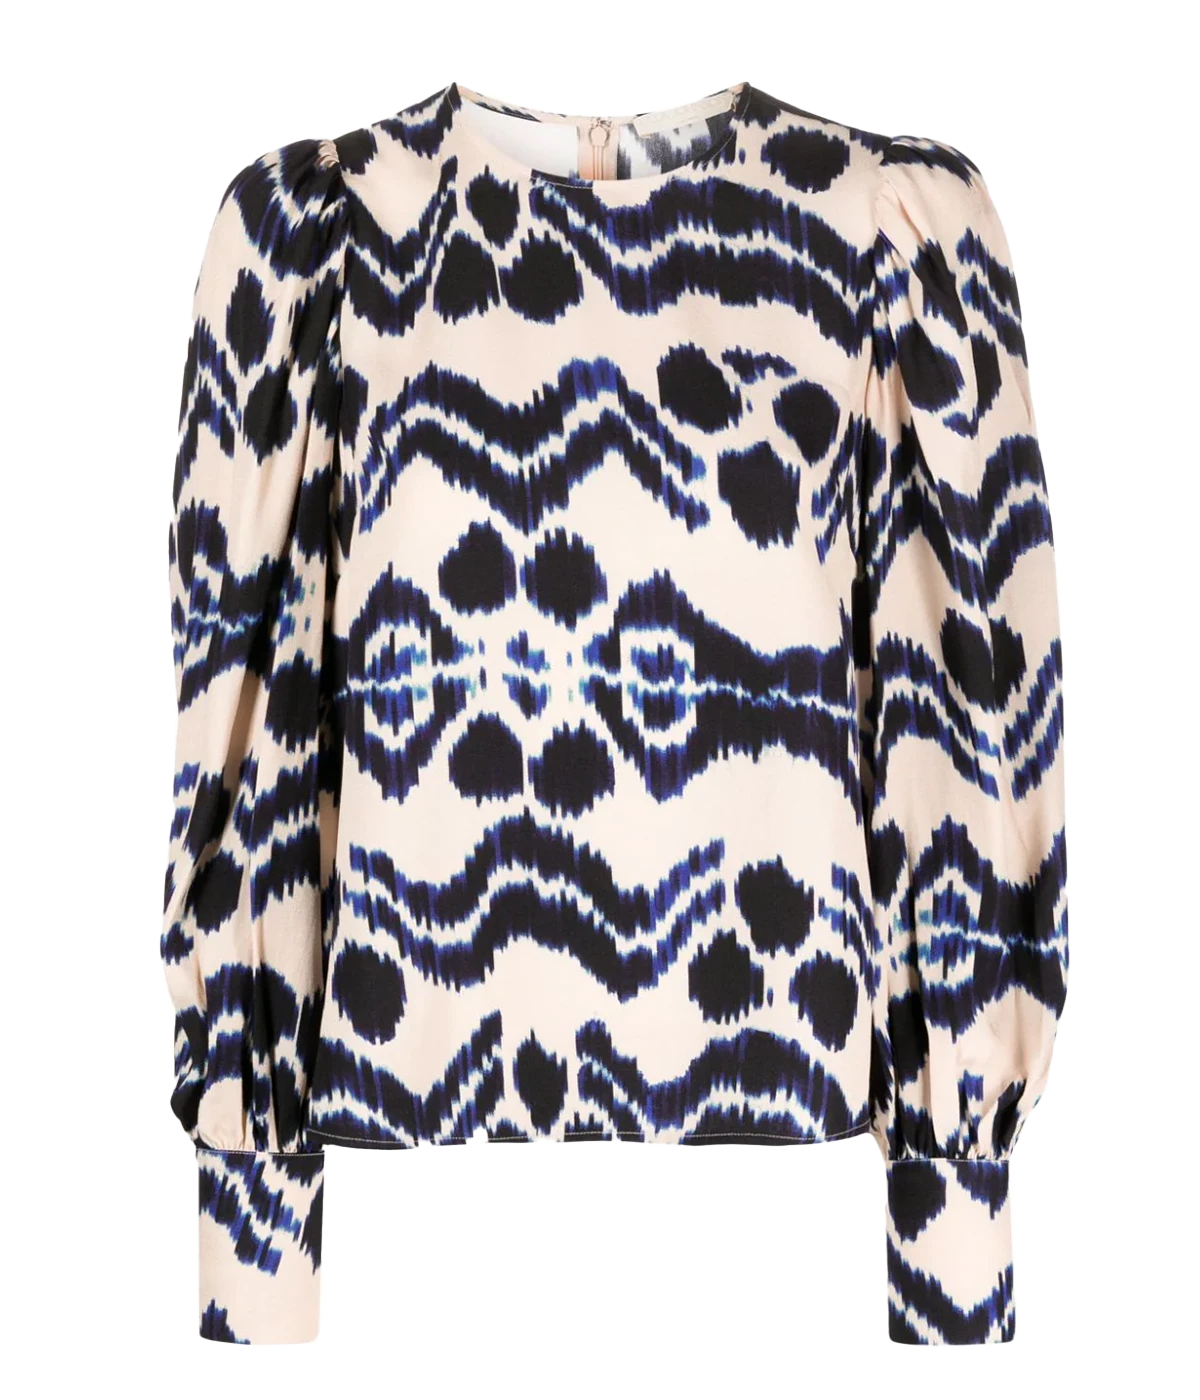 Long Sleeve, cuff, crew neckline, blouse, all over abstract print. Perfect for you next outing, this easy top from Ulla Johnson will dress up any jean outfit.